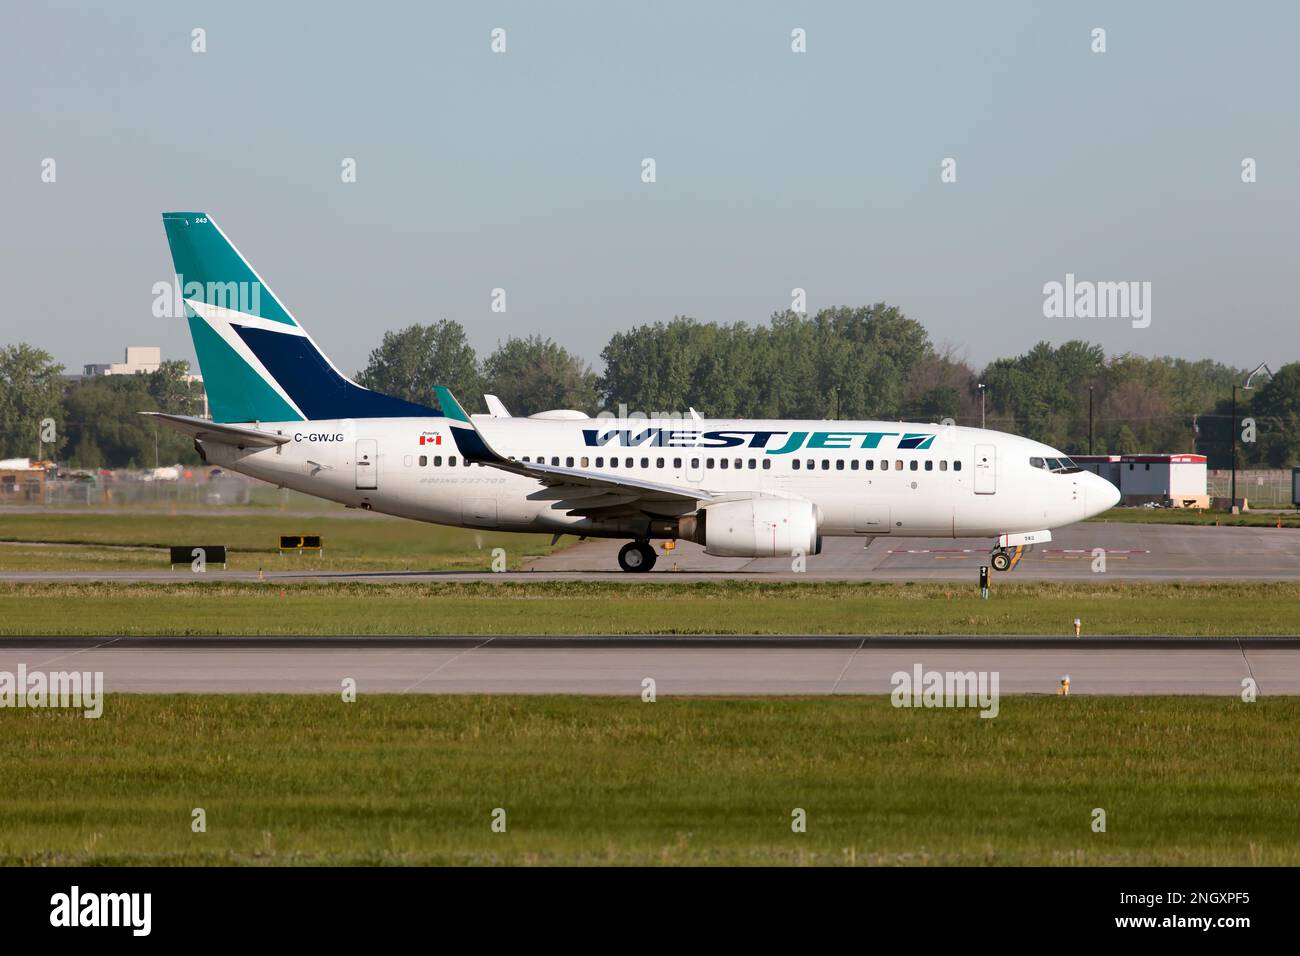 A WestJet Airlines Boeing 737-700 taxiing at Montreal Pierre Elliott Trudeau Int'l Airport. WestJet has two direct subsidiaries: WestJet Encore, which operates the Bombardier Q400; and WestJet Link, which operates the Saab 340B Stock Photo